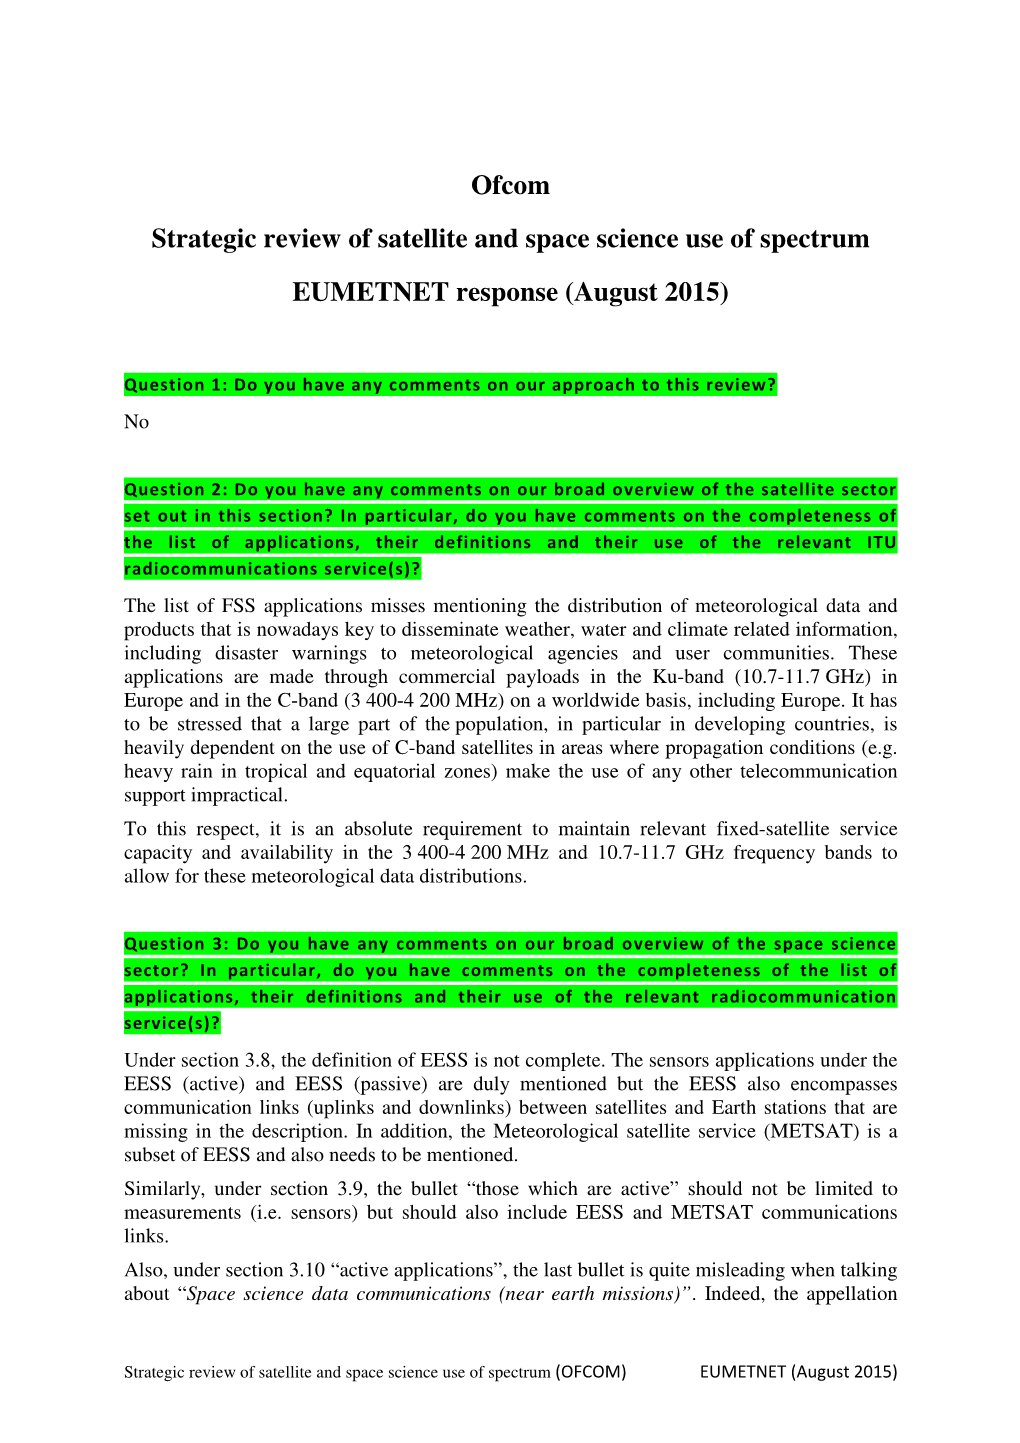 Ofcom Strategic Review of Satellite and Space Science Use of Spectrum EUMETNET Response (August 2015)